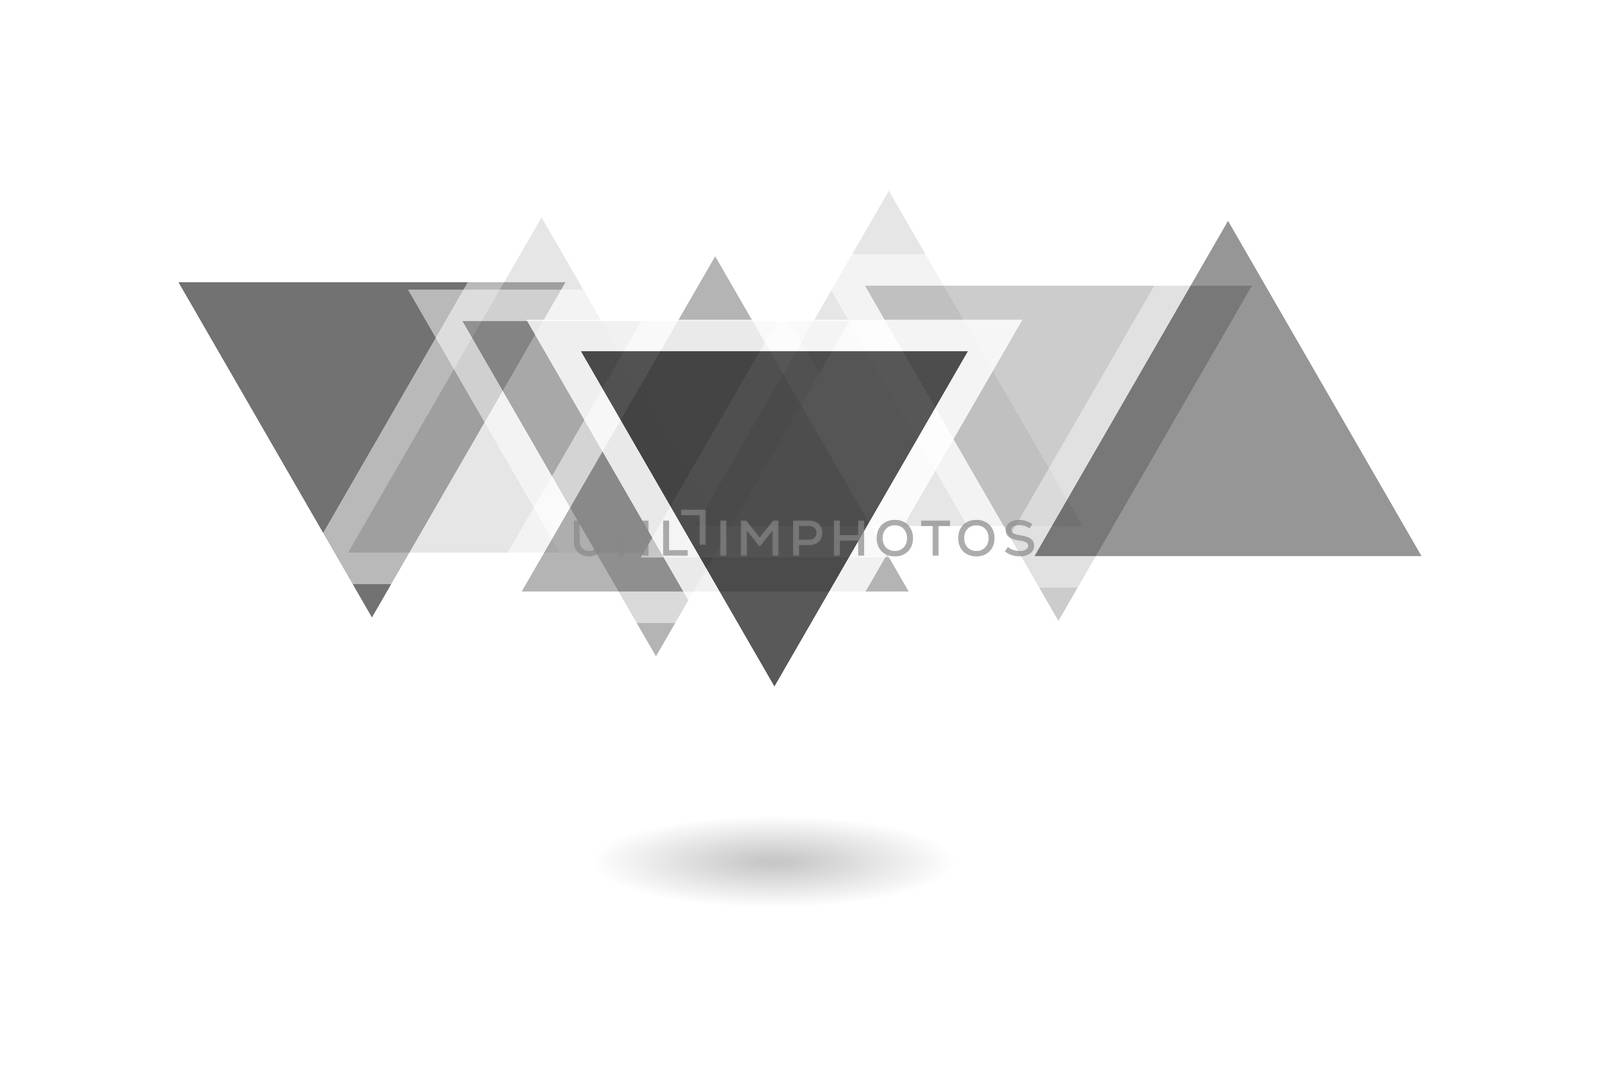 Abstract geometric pattern, black and white overlapping triangle logo